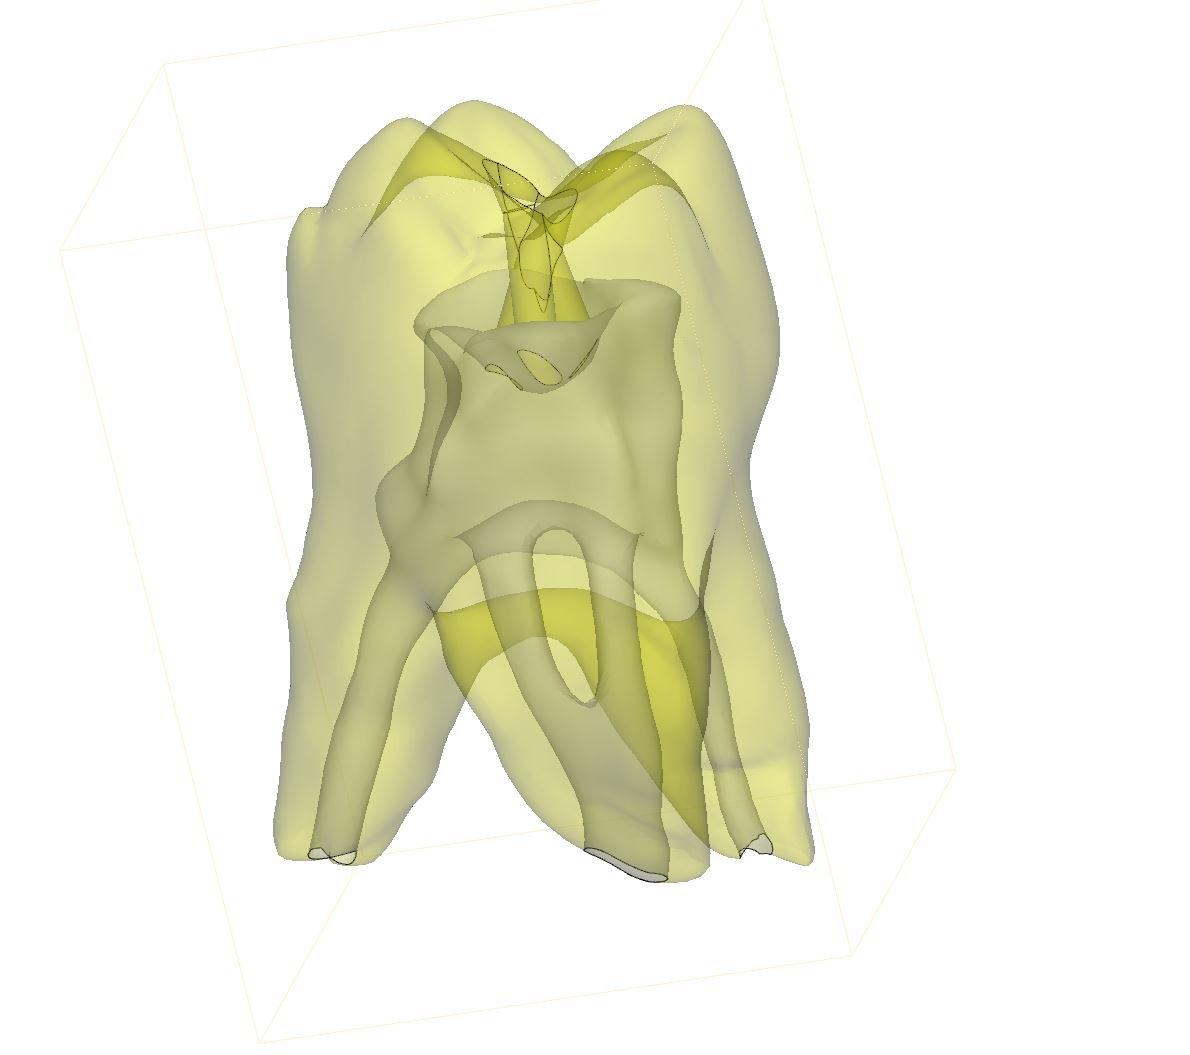 3D printing teaching aids: Screenshot of Materialise Mimics showing single tooth.